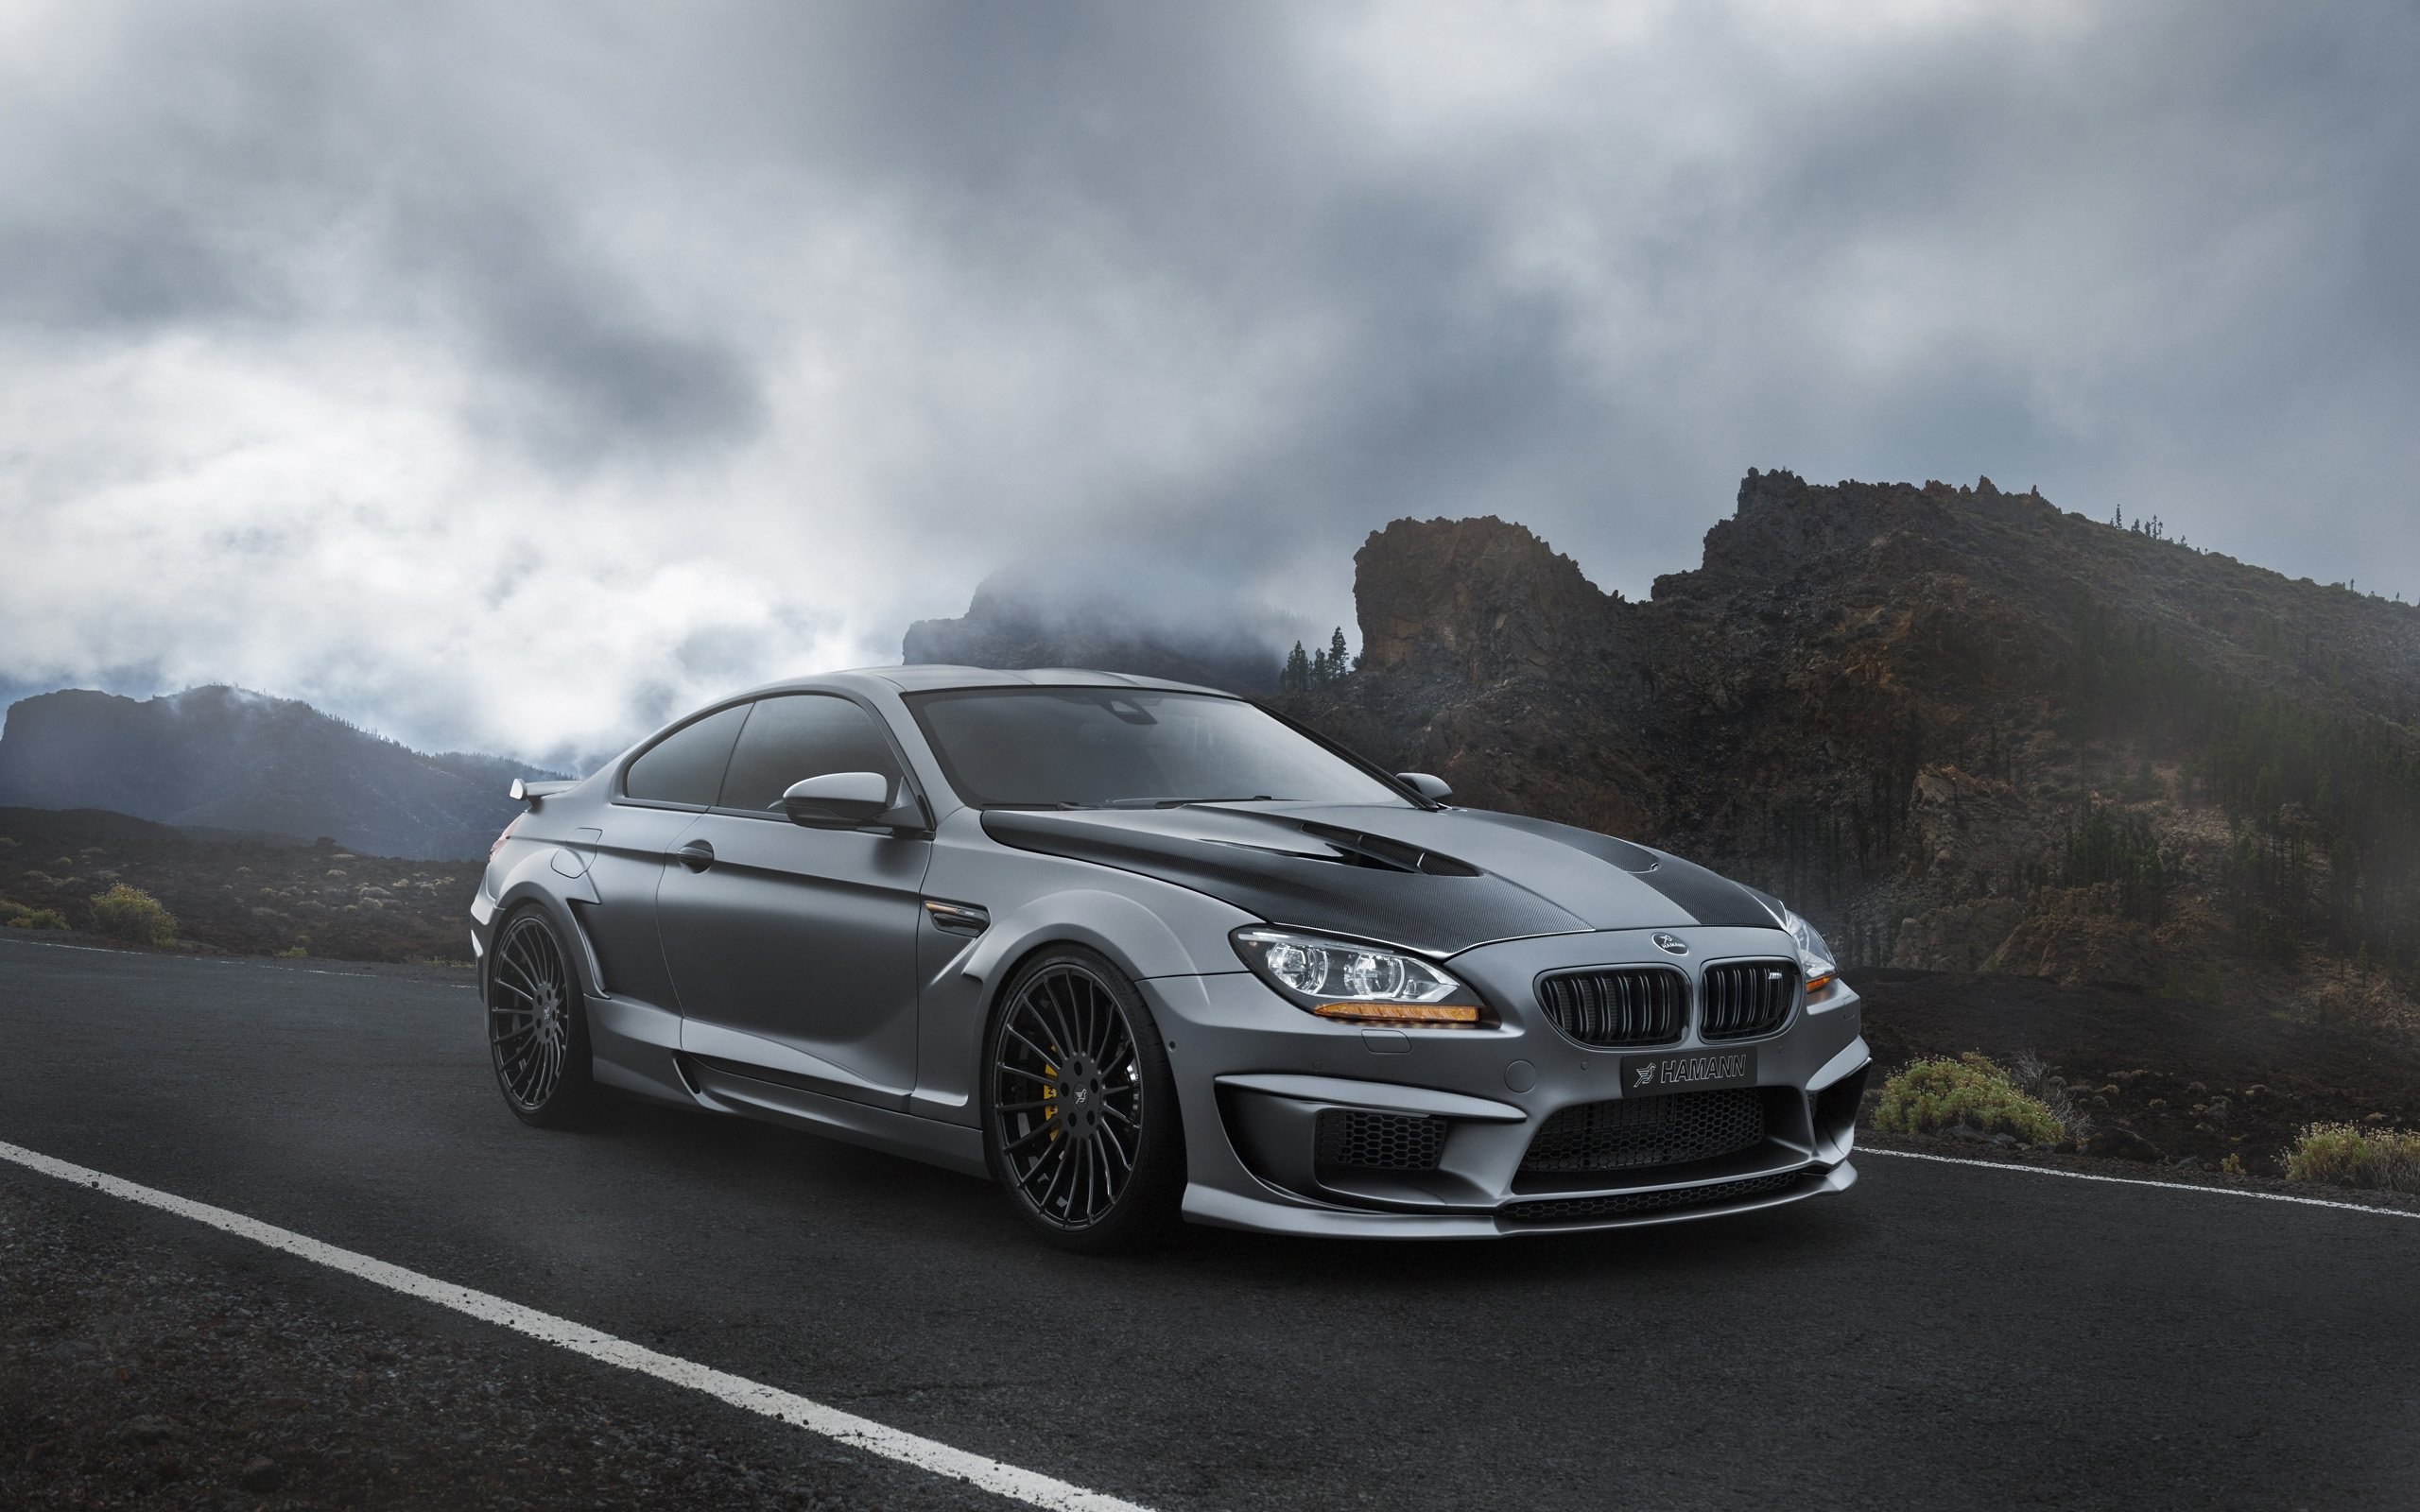 Gallery For Gt Bmw M6 Wallpaper